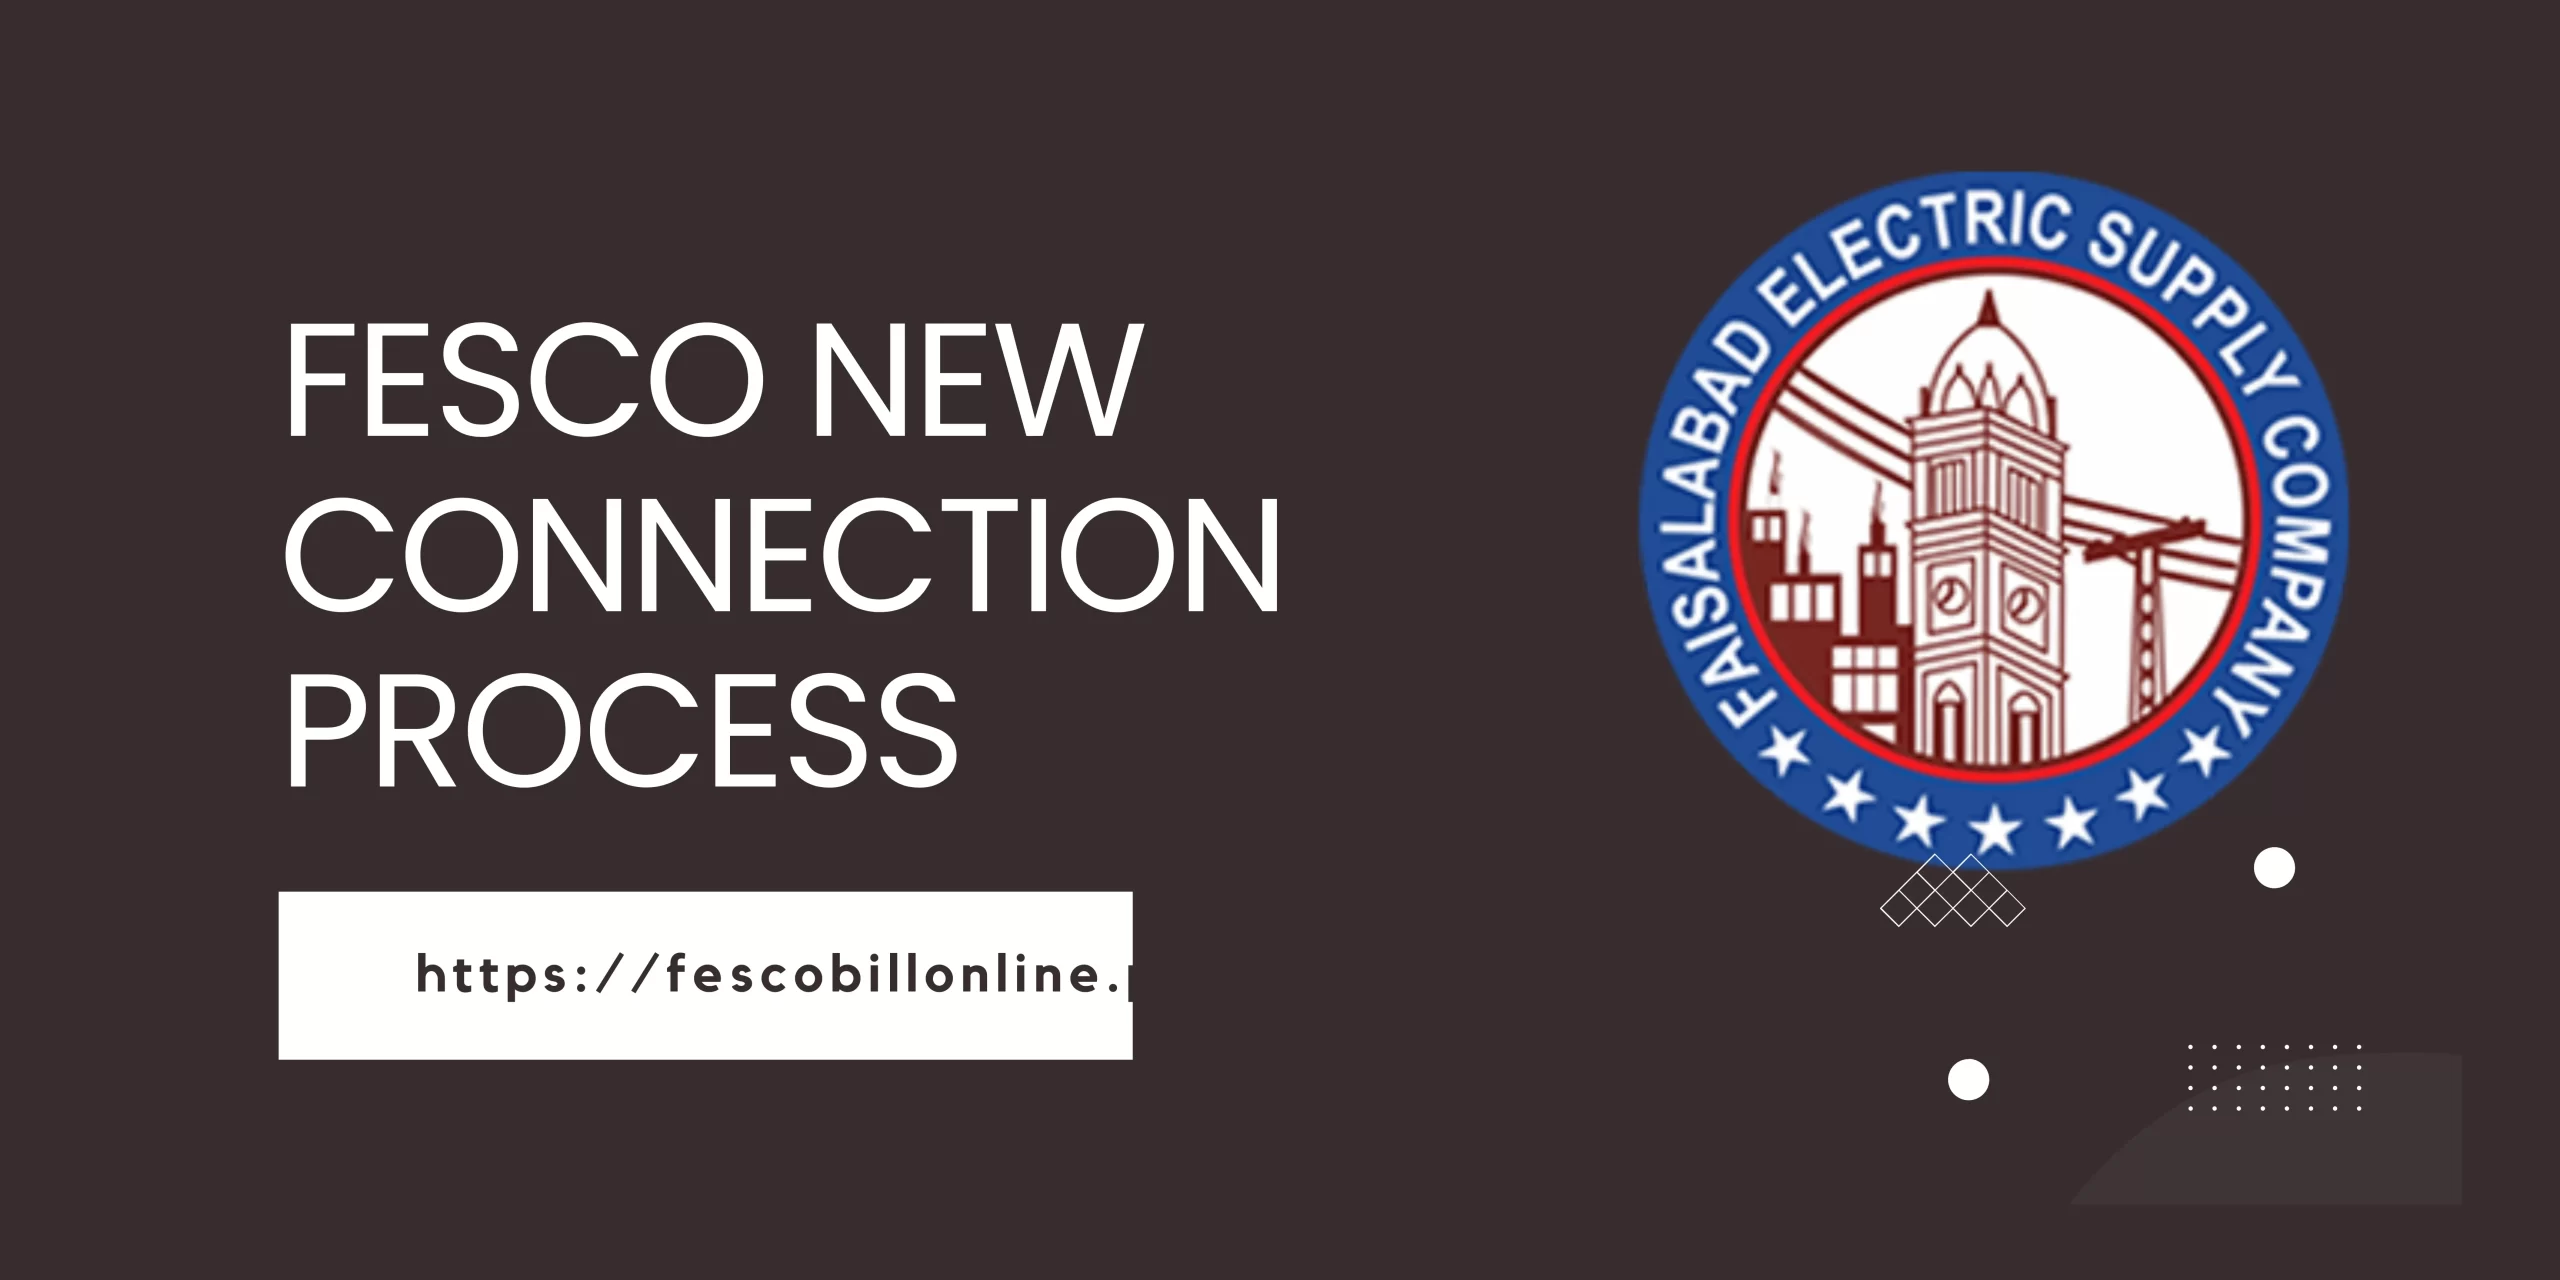 FESCO new Connection process, application, and tracking